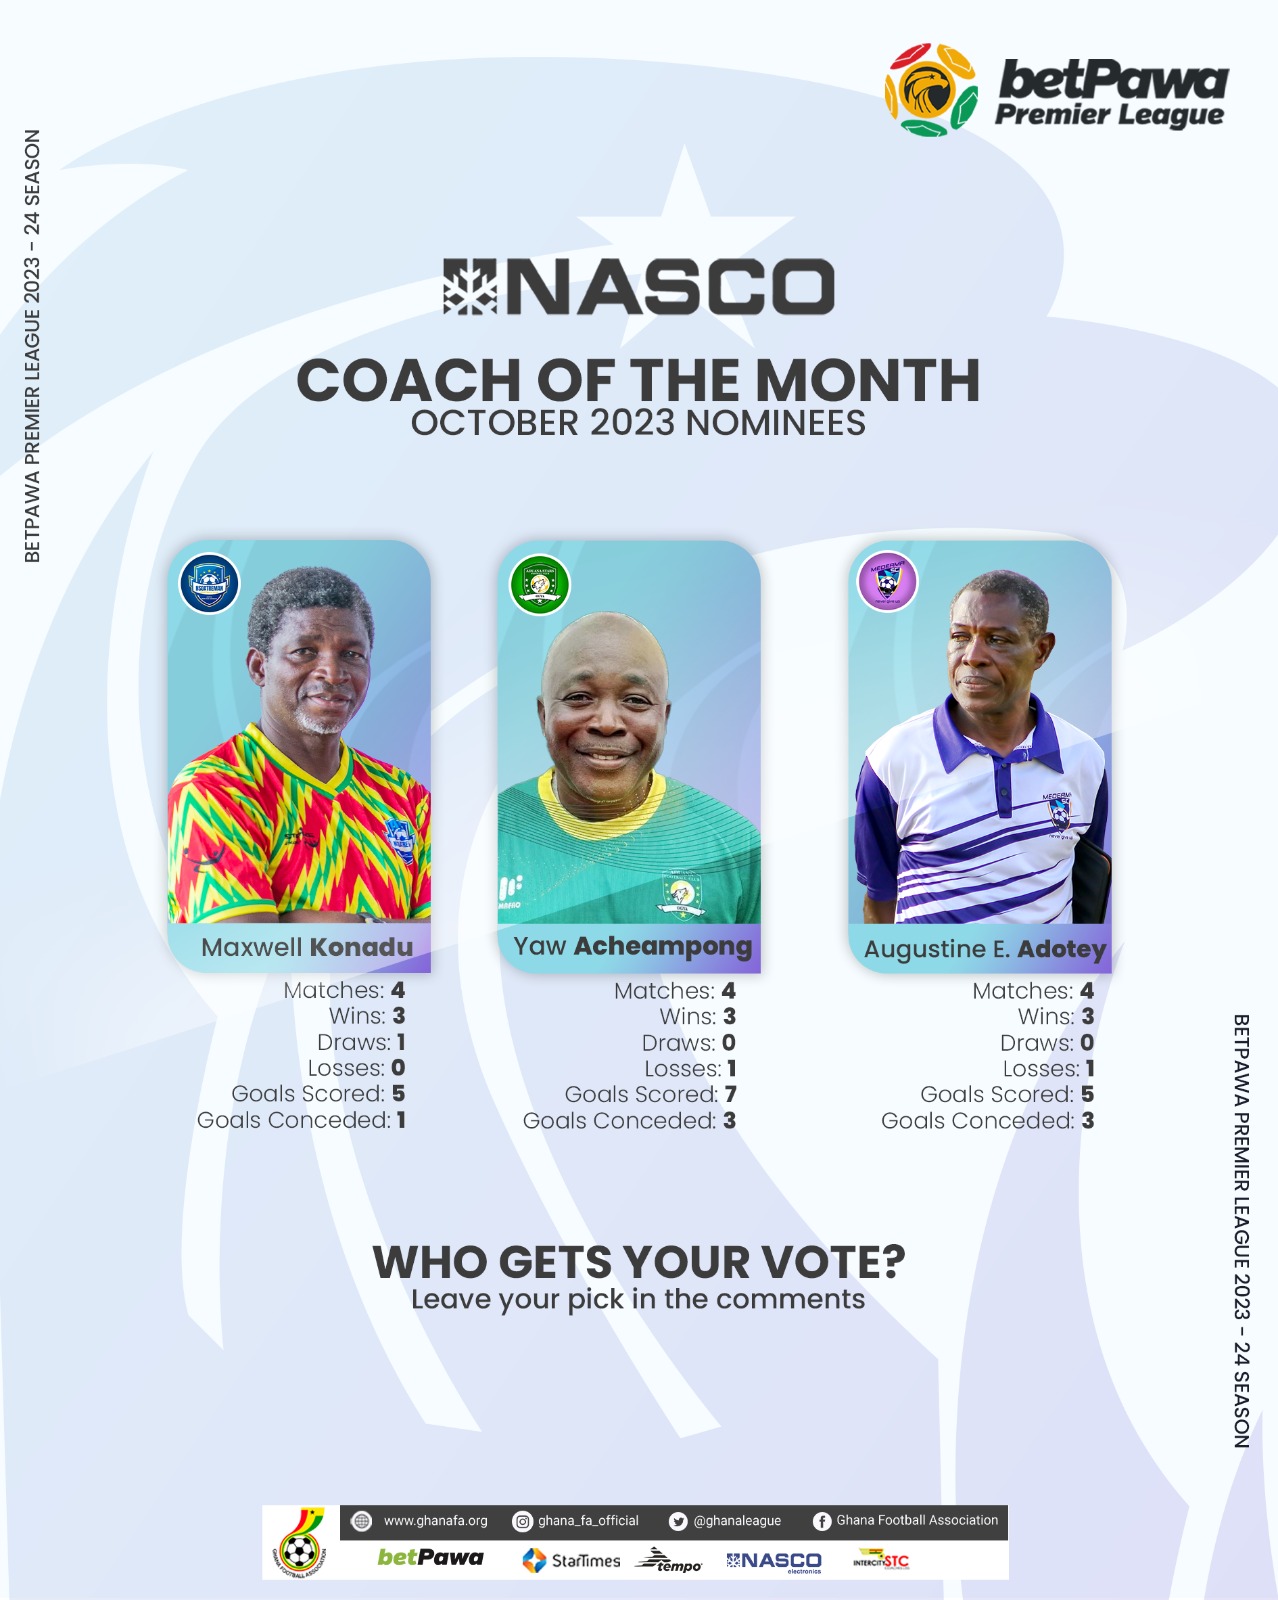 Three coaches make shortlist for NASCO Coach of the Month - October